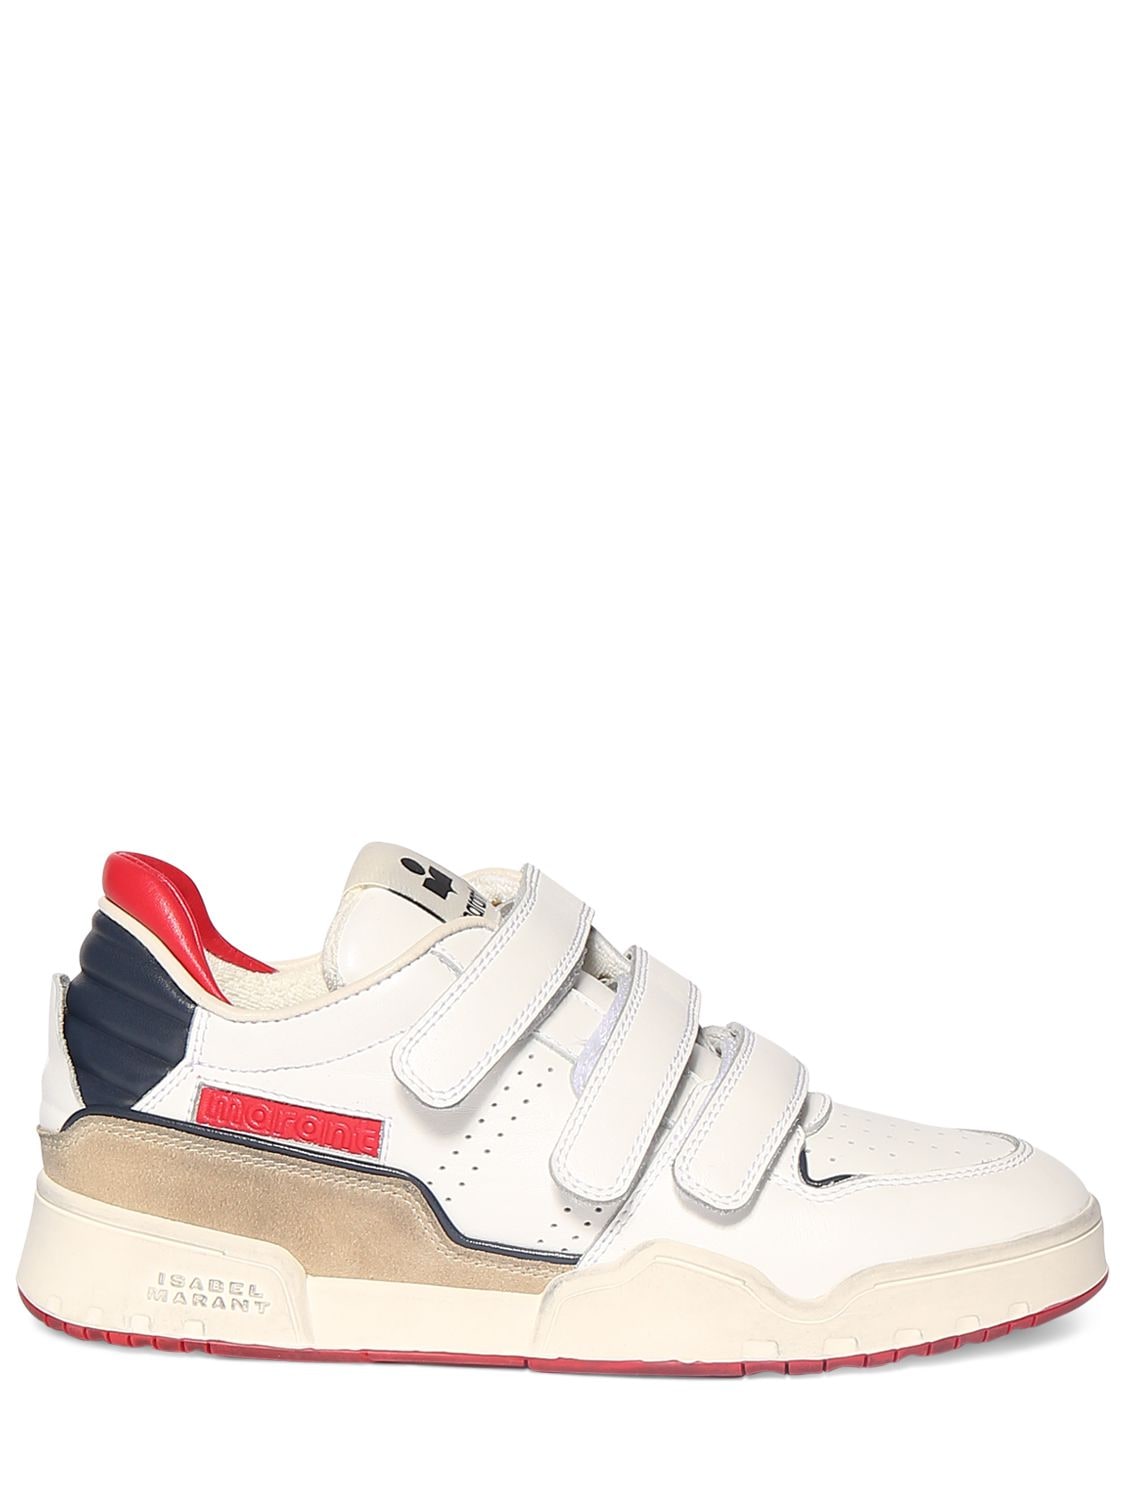 Isabel Marant Oney Low Leather Sneakers In Blue